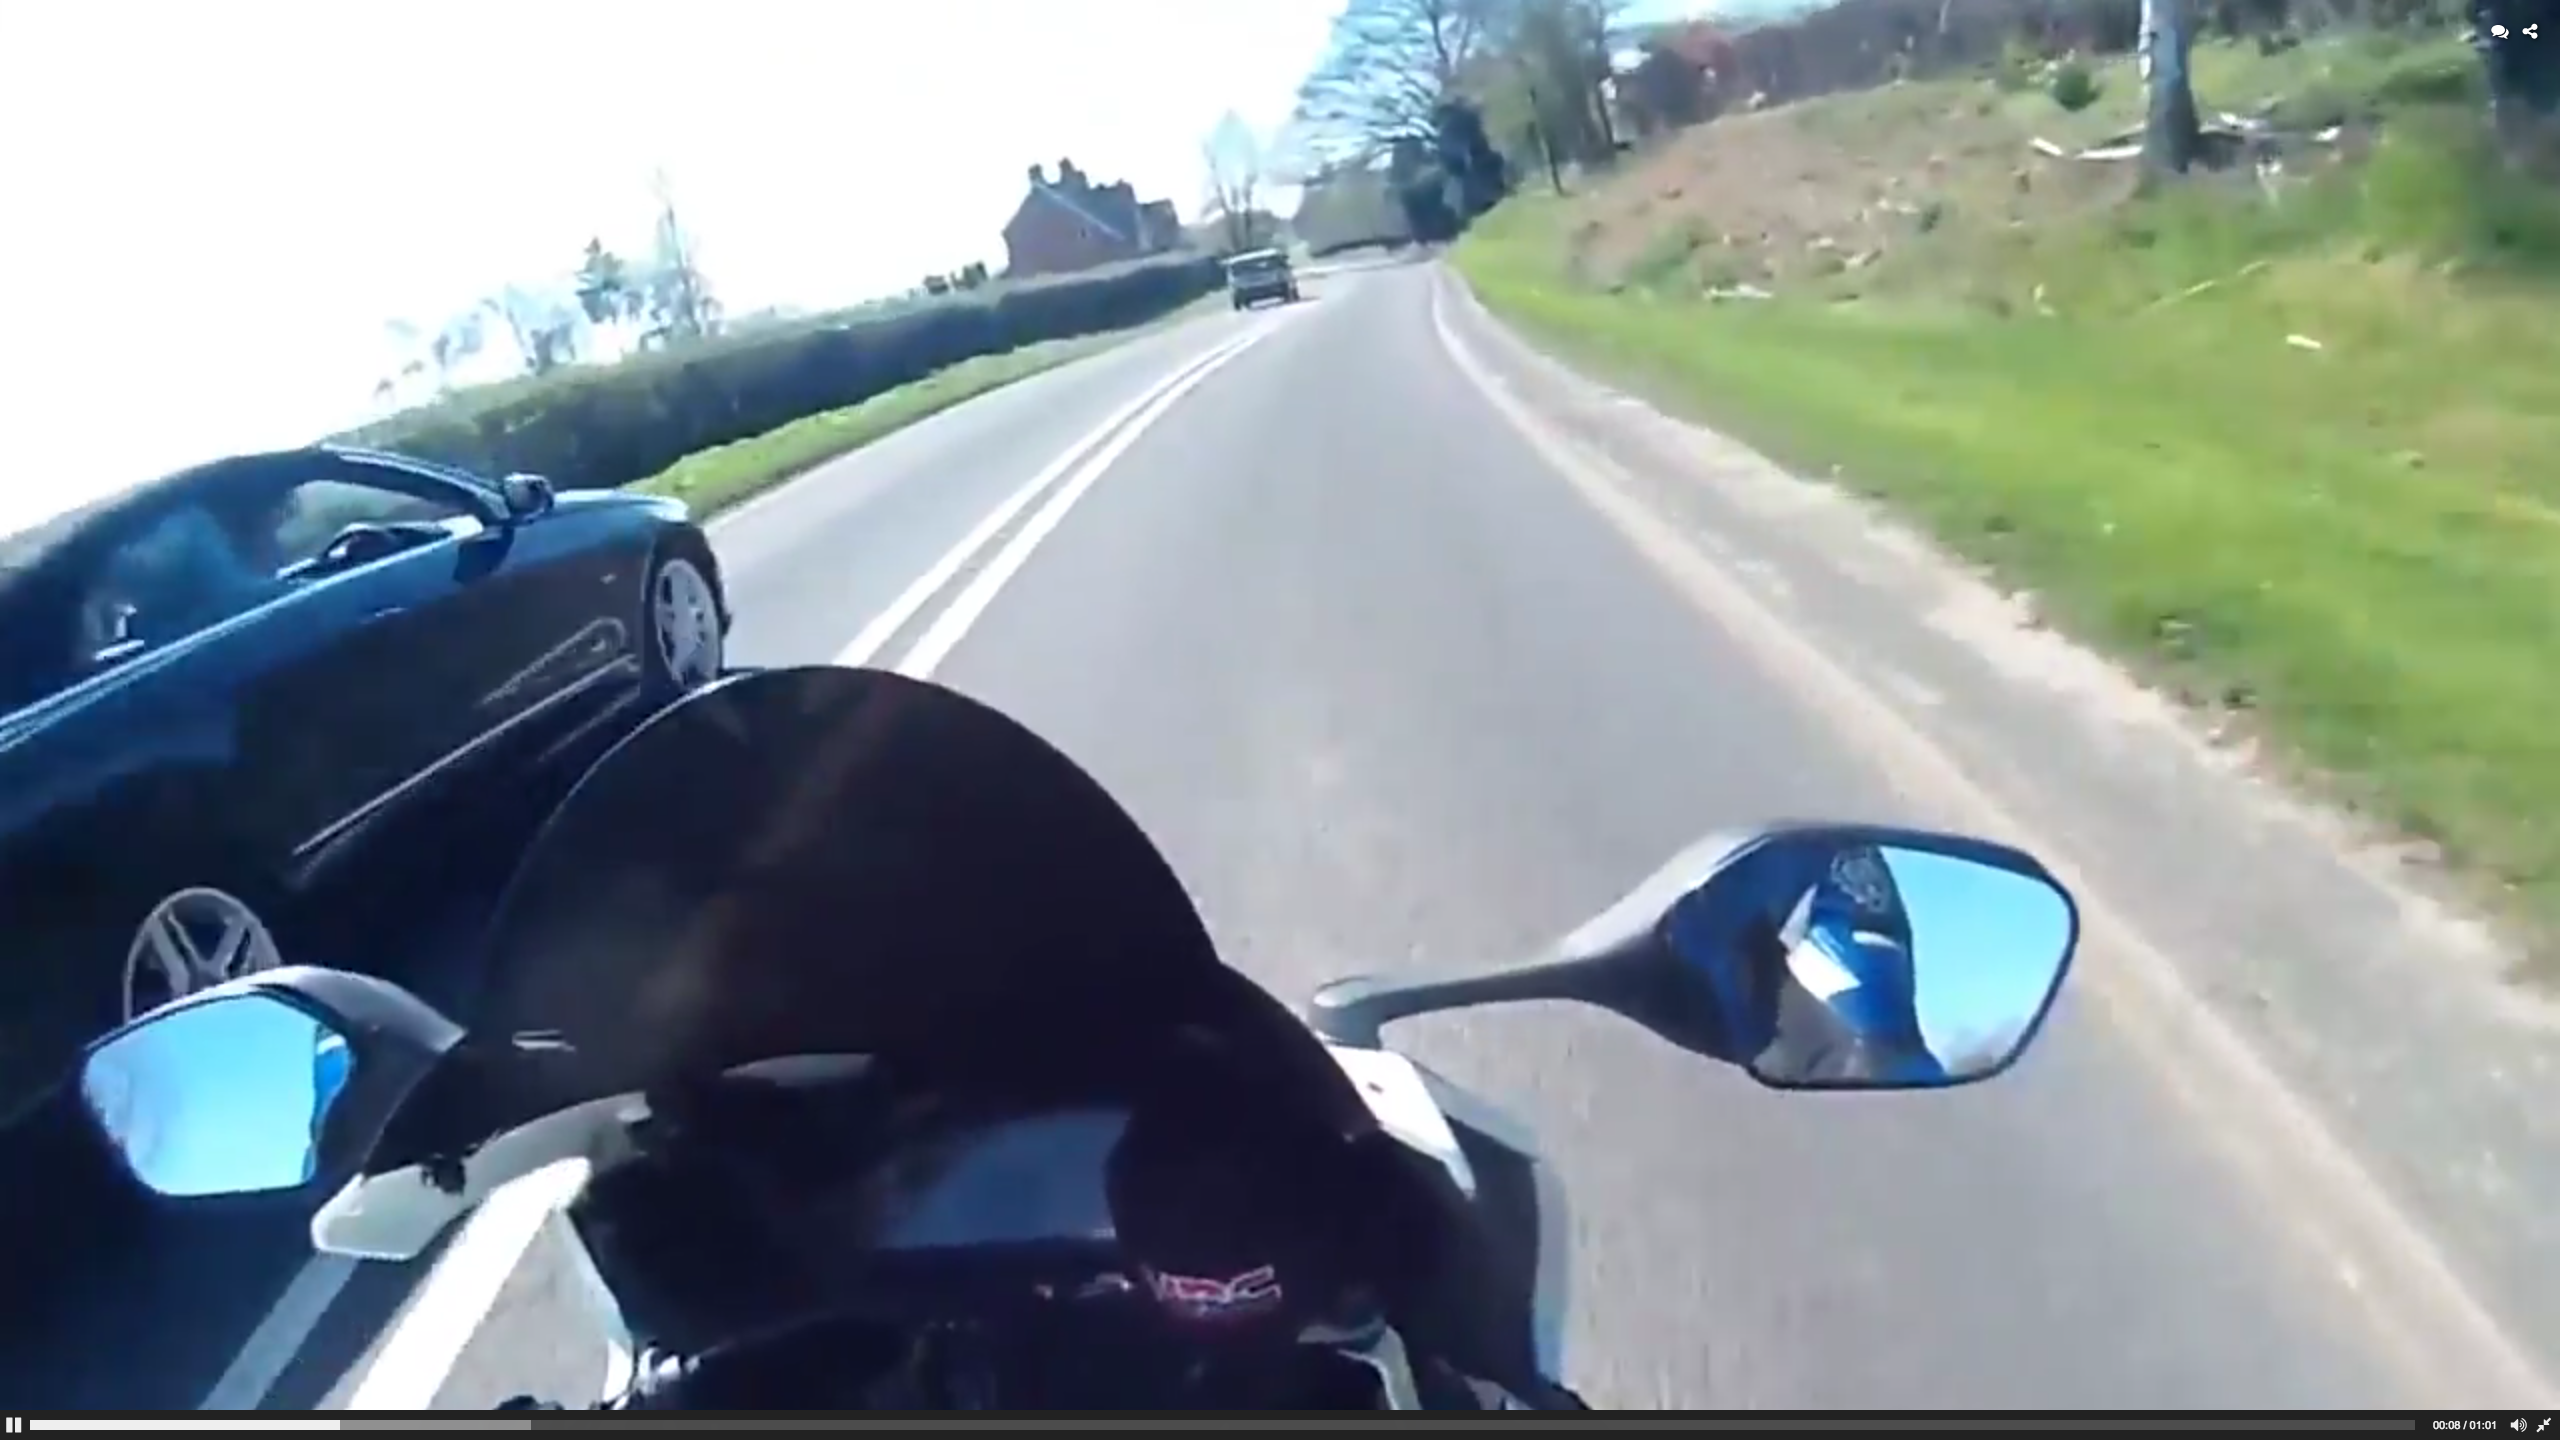 Motorcyclist jailed after driving at over 150mph